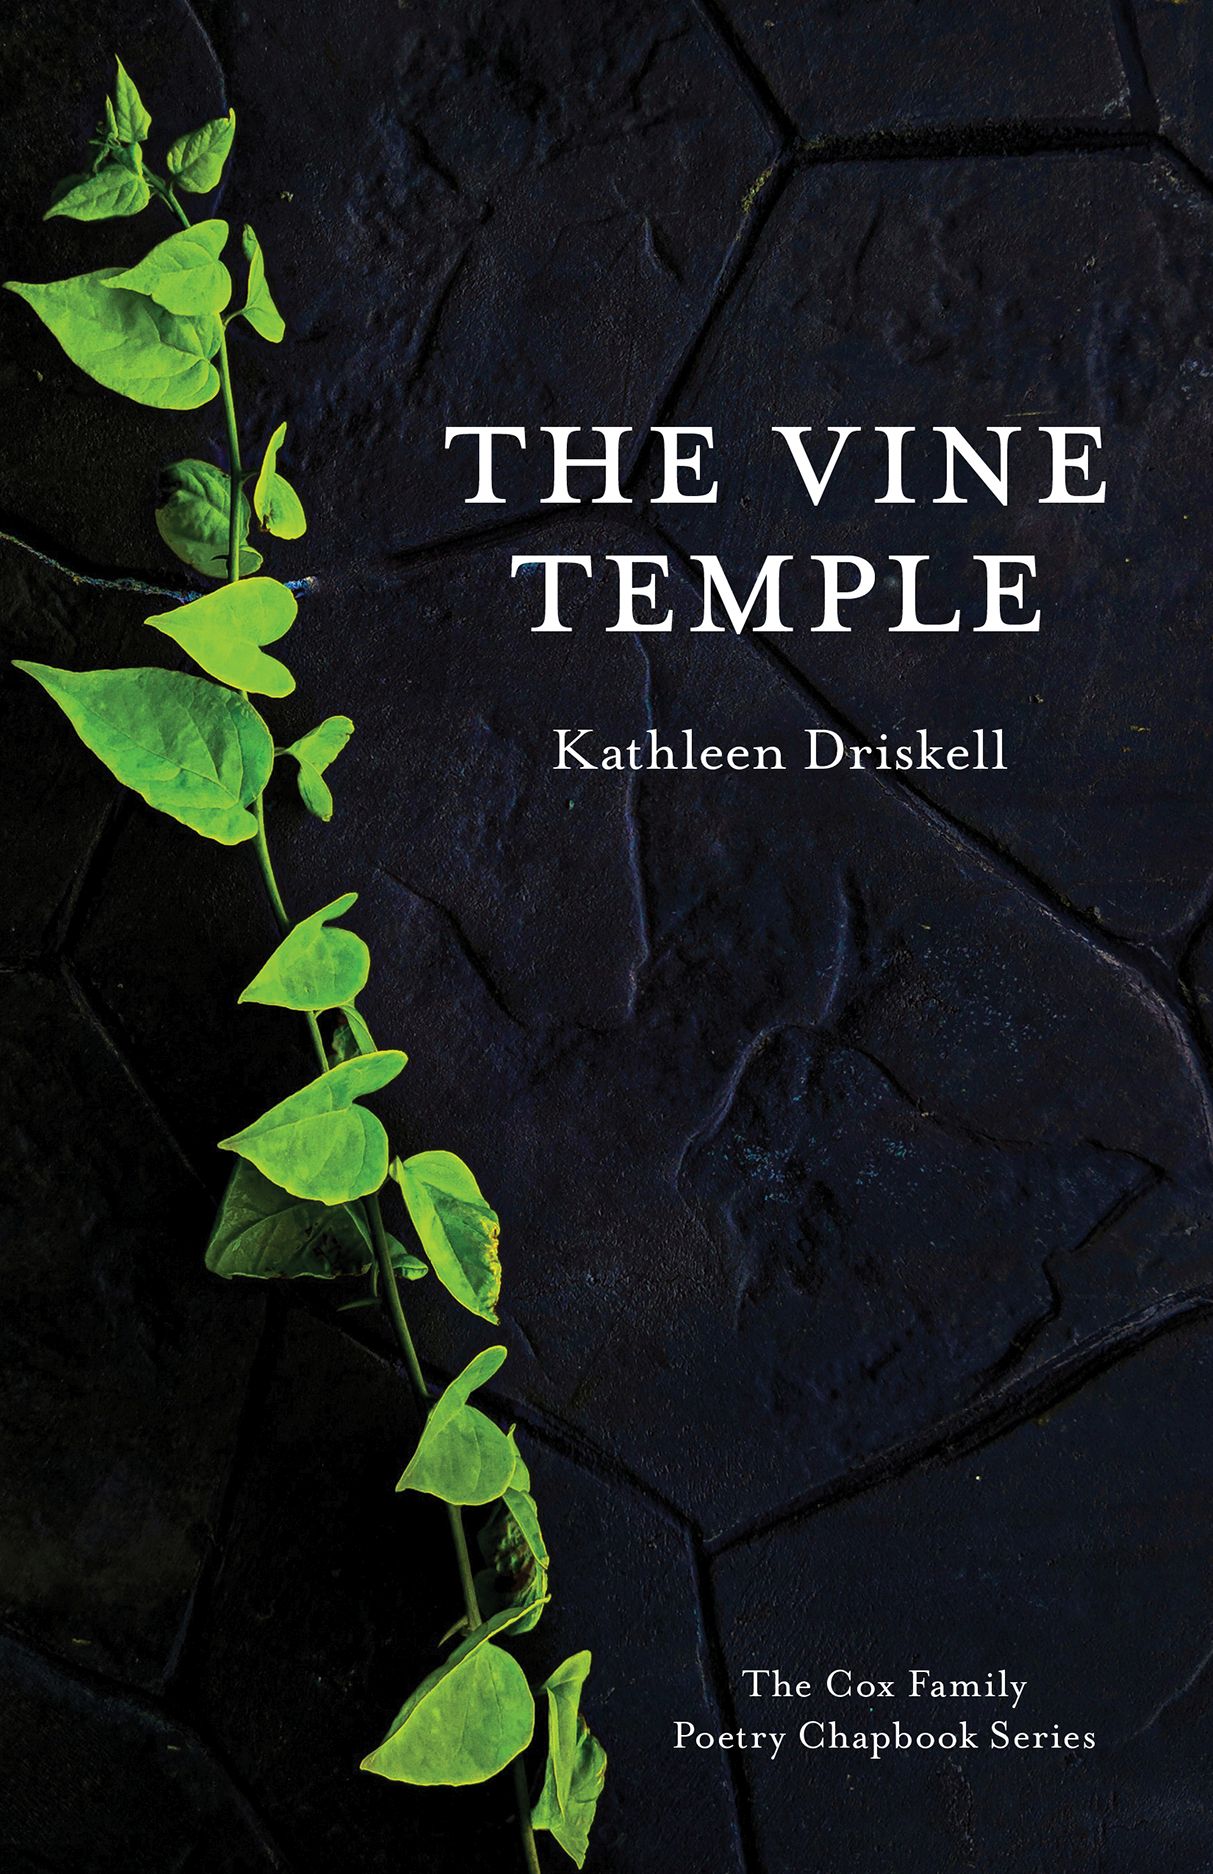 Kathleen Driskell to Participate in the Kentucky Book Festival with “The Vine Temple”